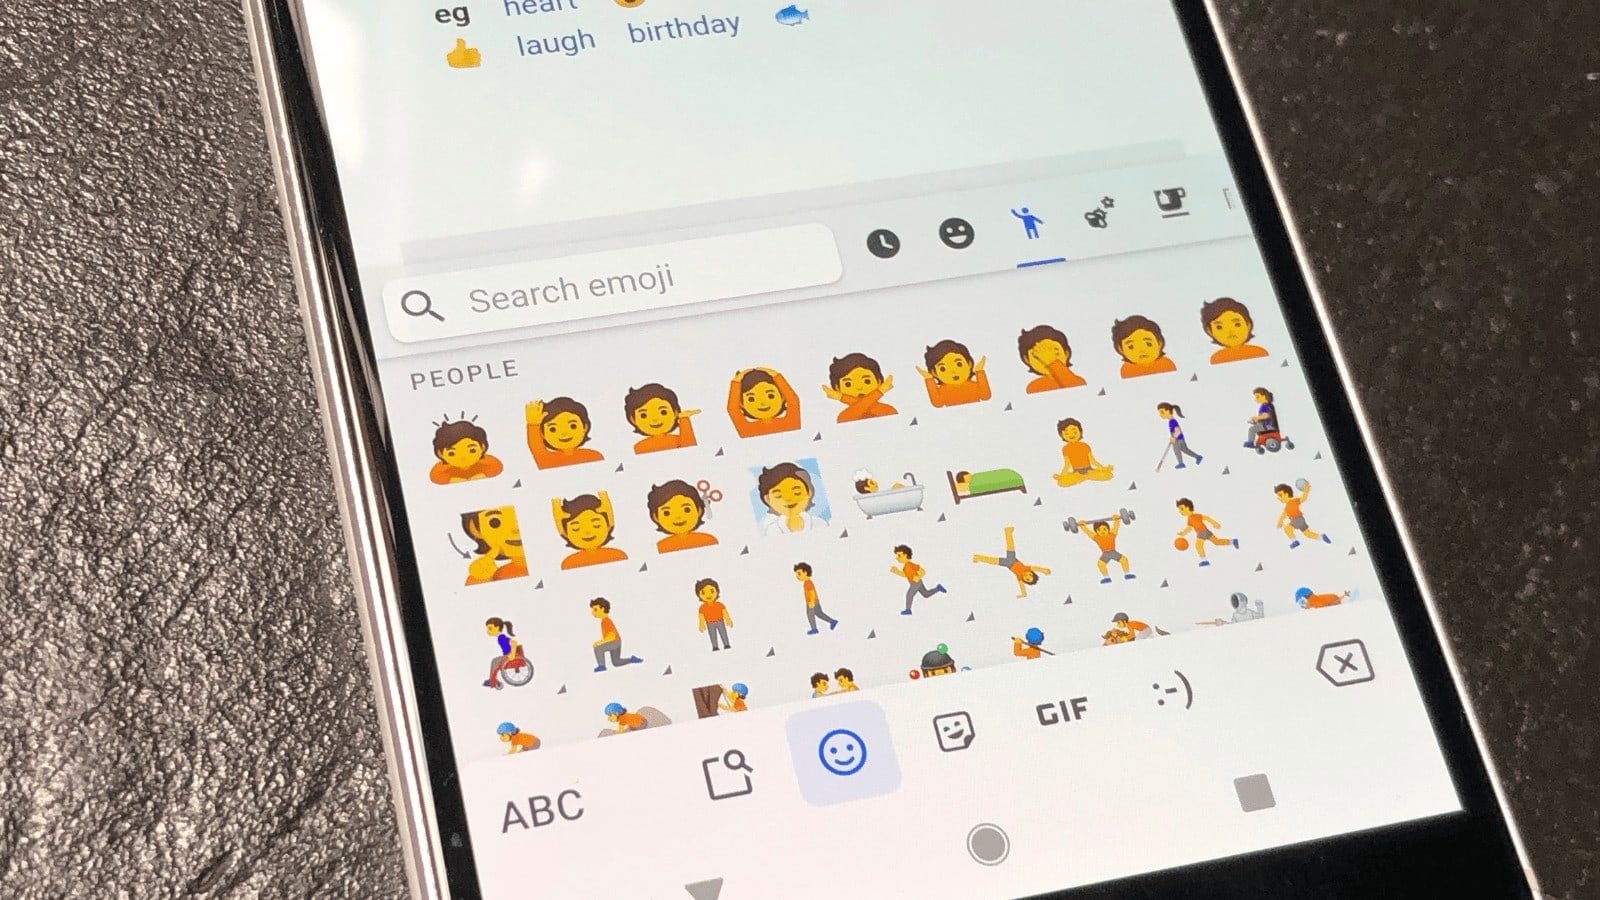 A smartphone with gender-inclusive emojis displayed on the screen.